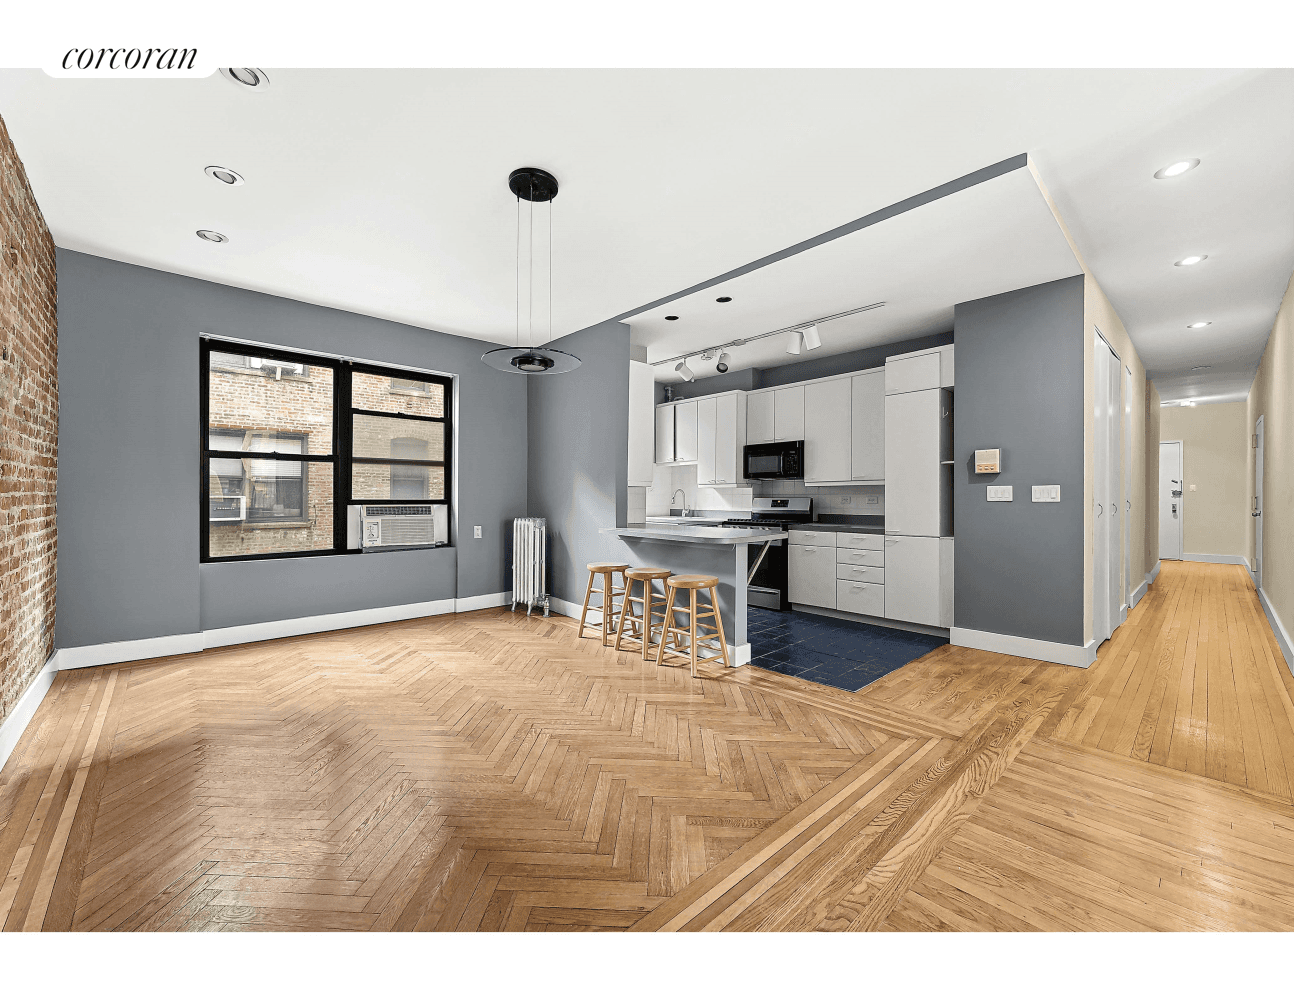 Overlooking tree filled Lafayette Plaza, next to the Hudson River, this pre war north and south facing two bedroom co op apartment has lots of light.